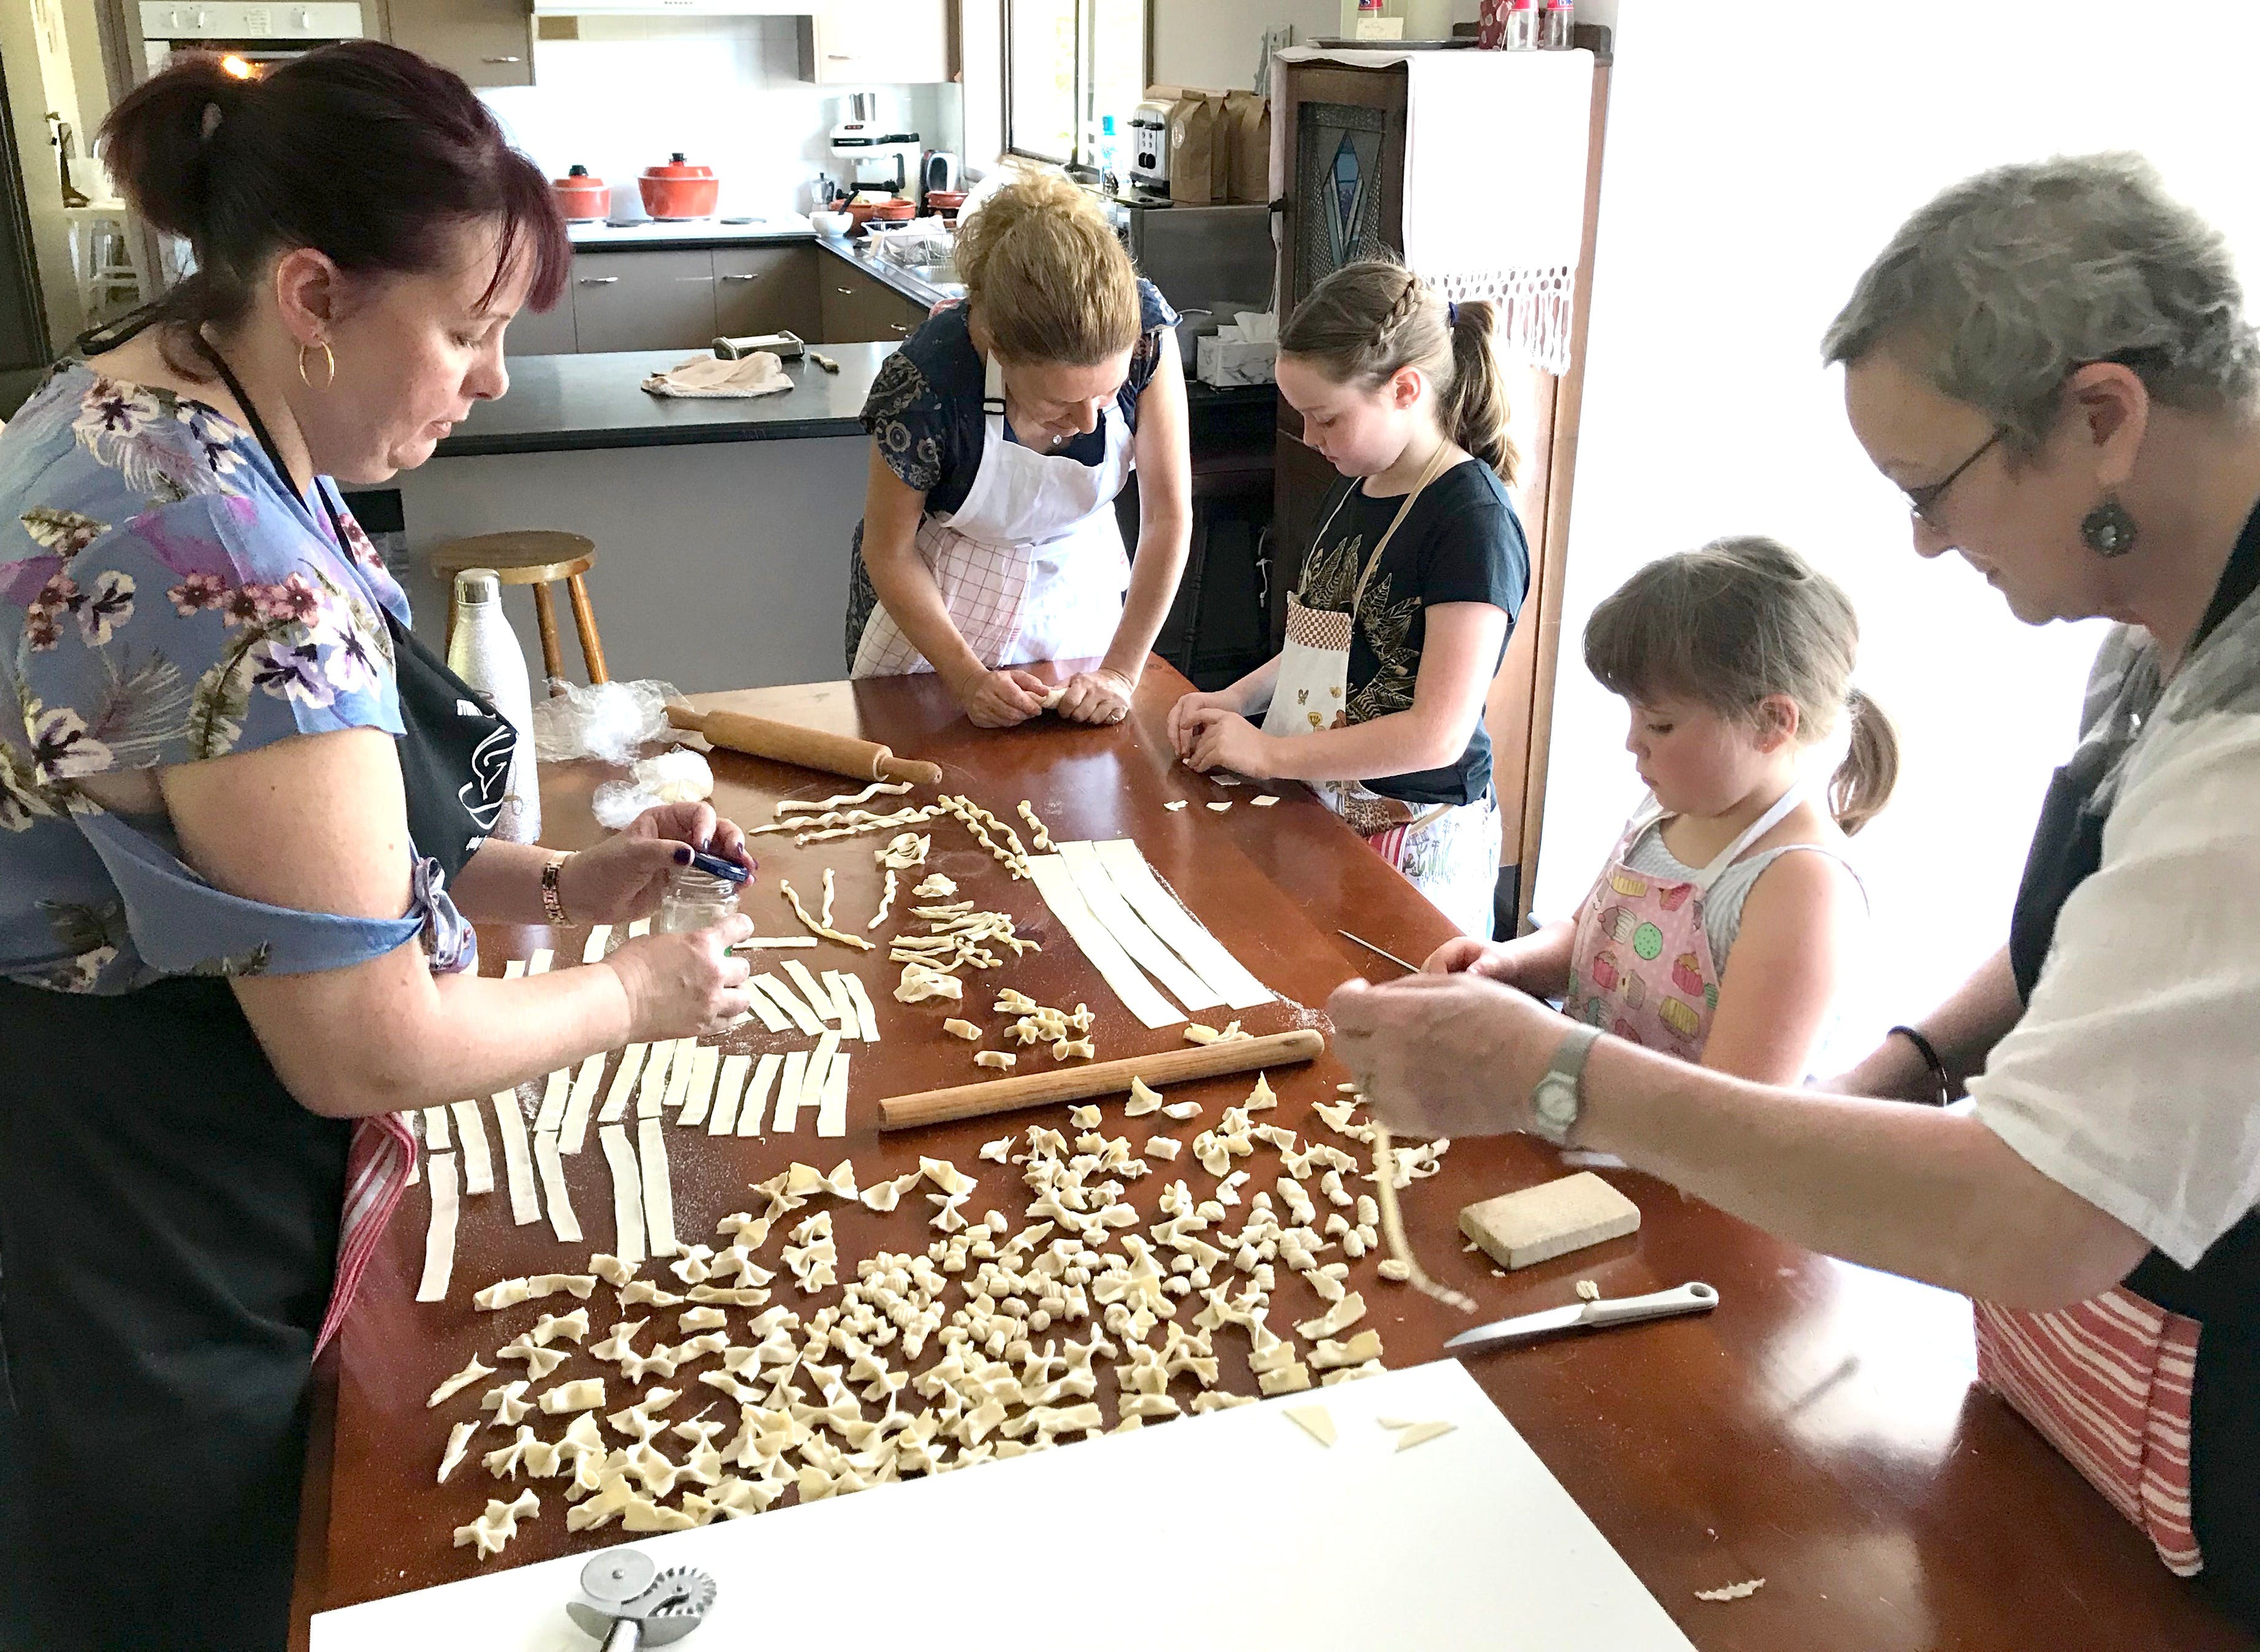 Kids Pasta Making Class - hands on fun at your house - Tourism Bookings WA